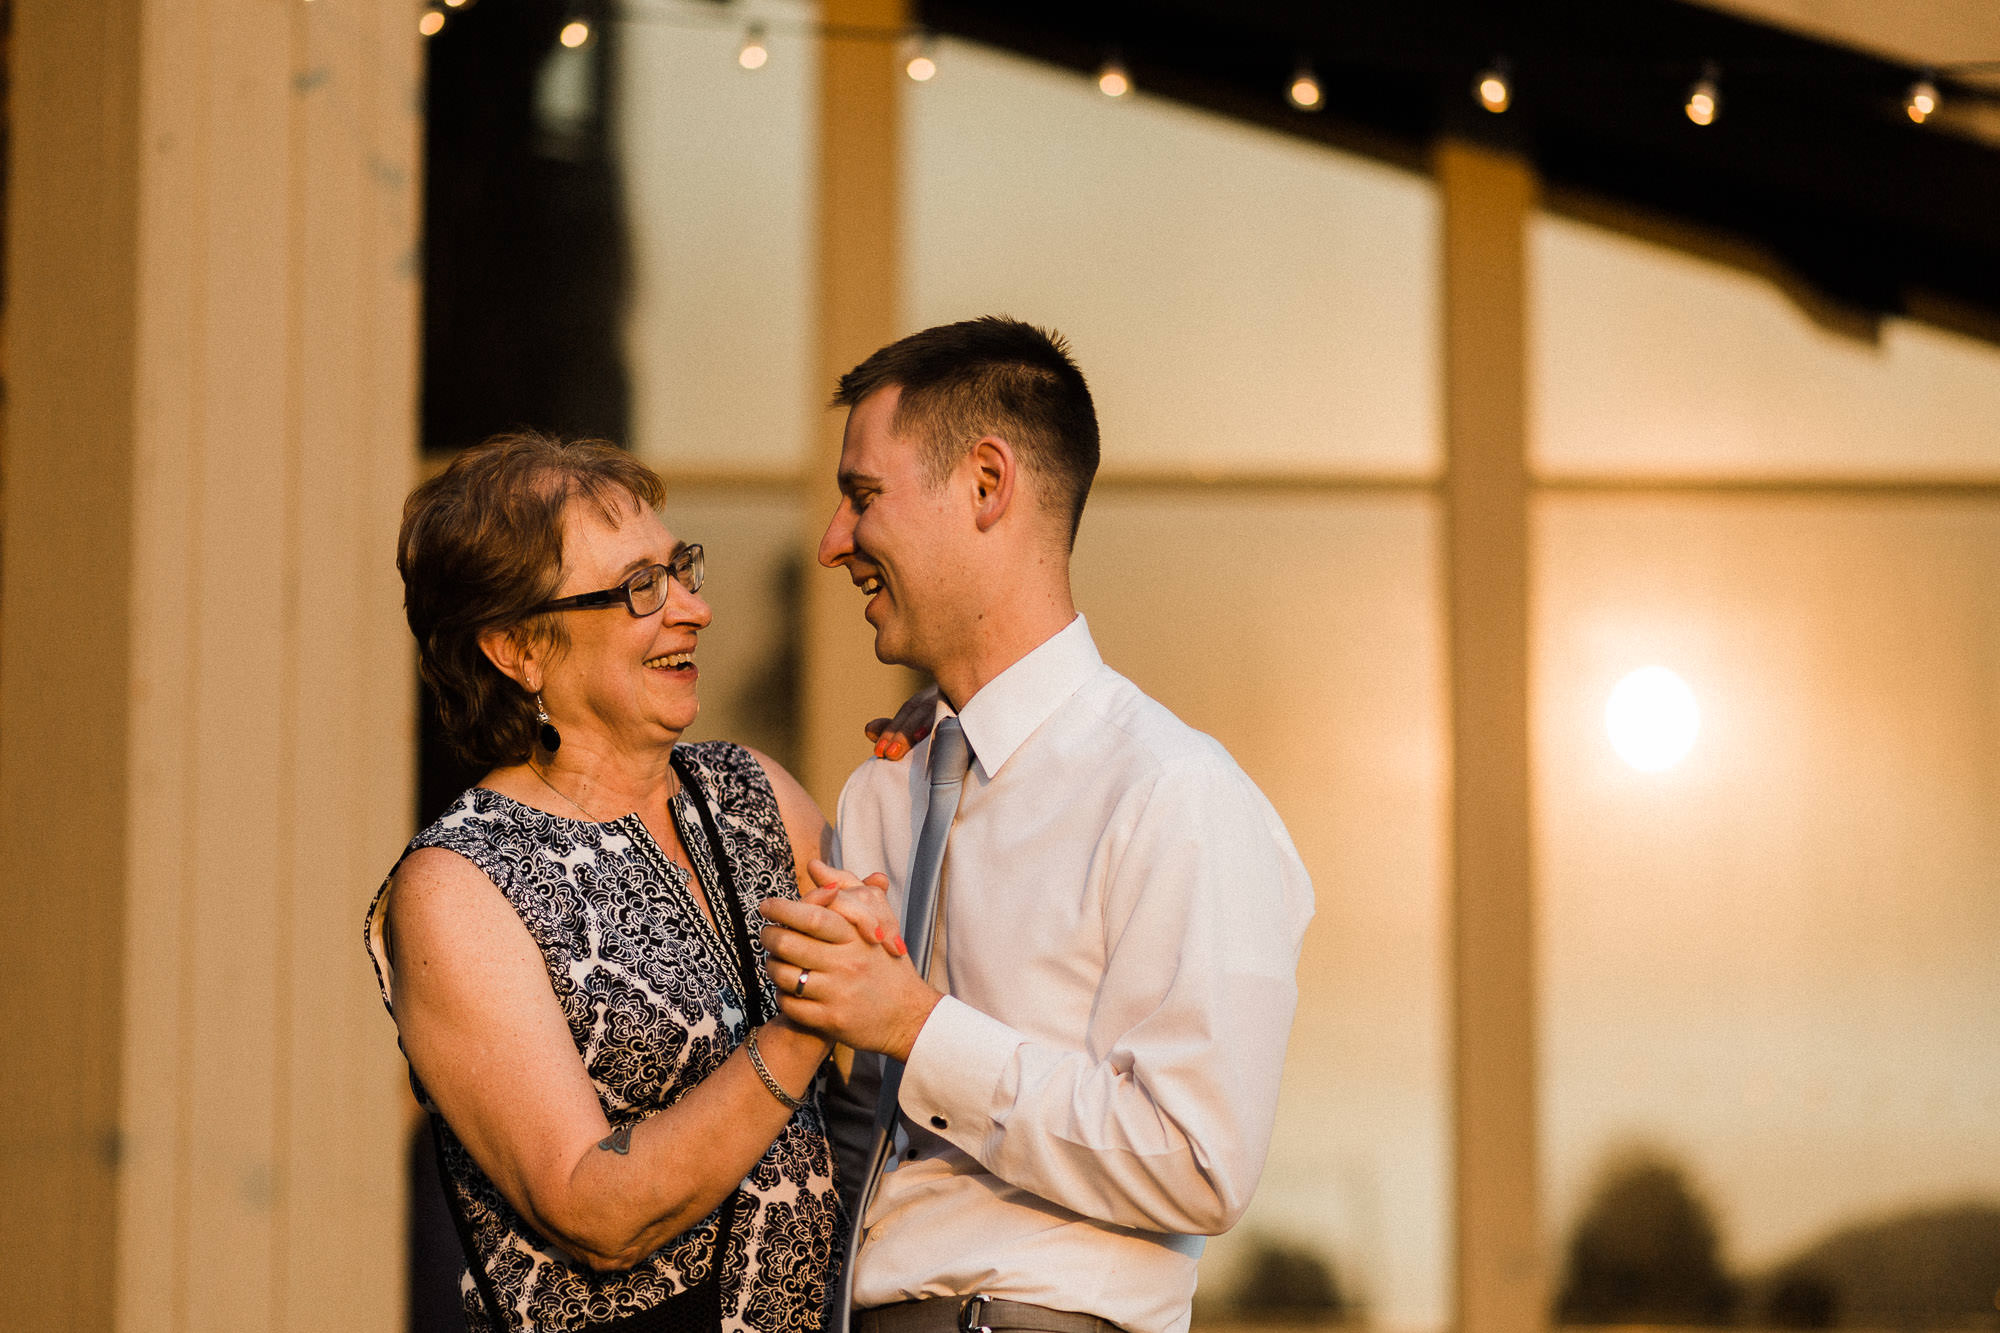 Groom and mother dance during wedding reception at Black Butte Ranch in Oregon